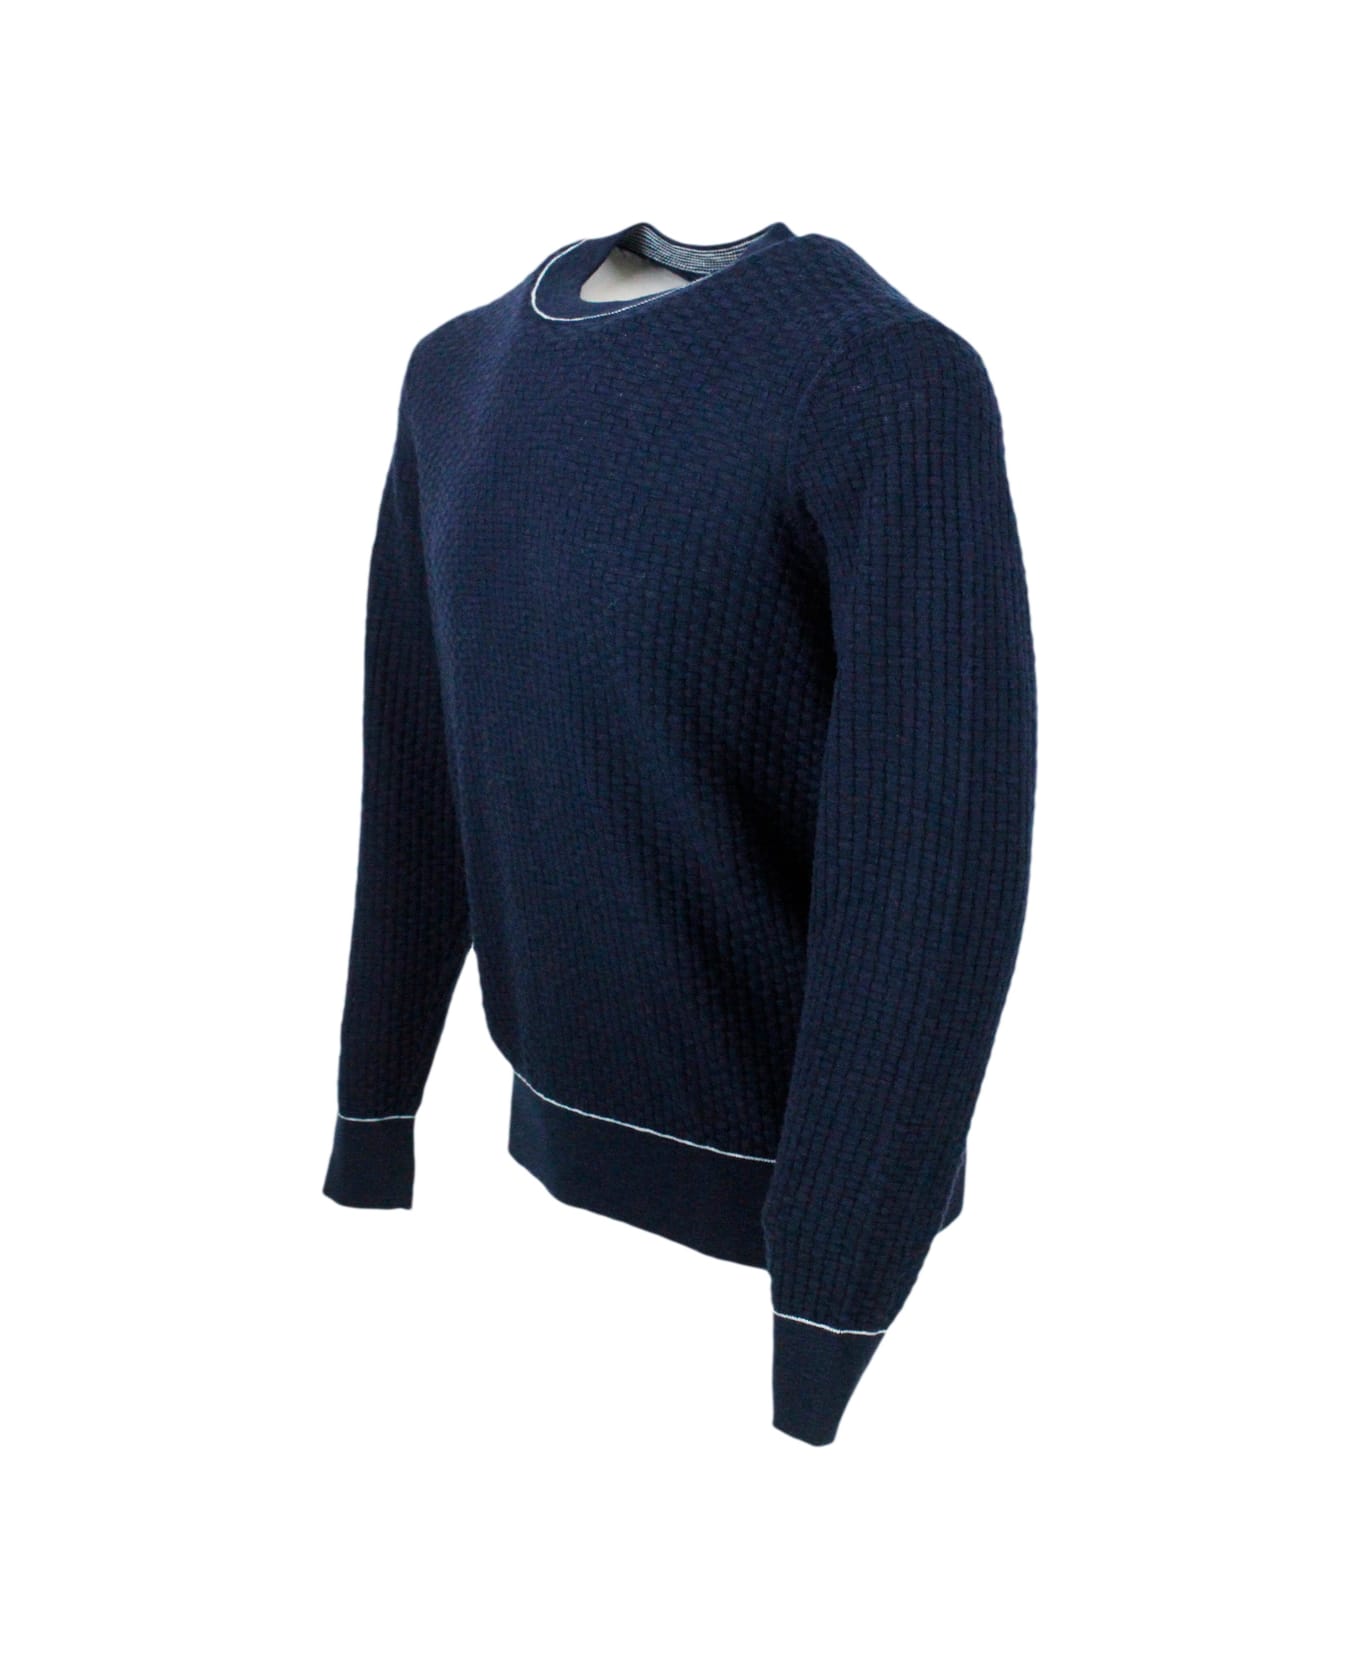 Armani Collezioni Crew-neck And Long-sleeved Sweater In Cotton And Linen With Honeycomb Workmanship. - Blue